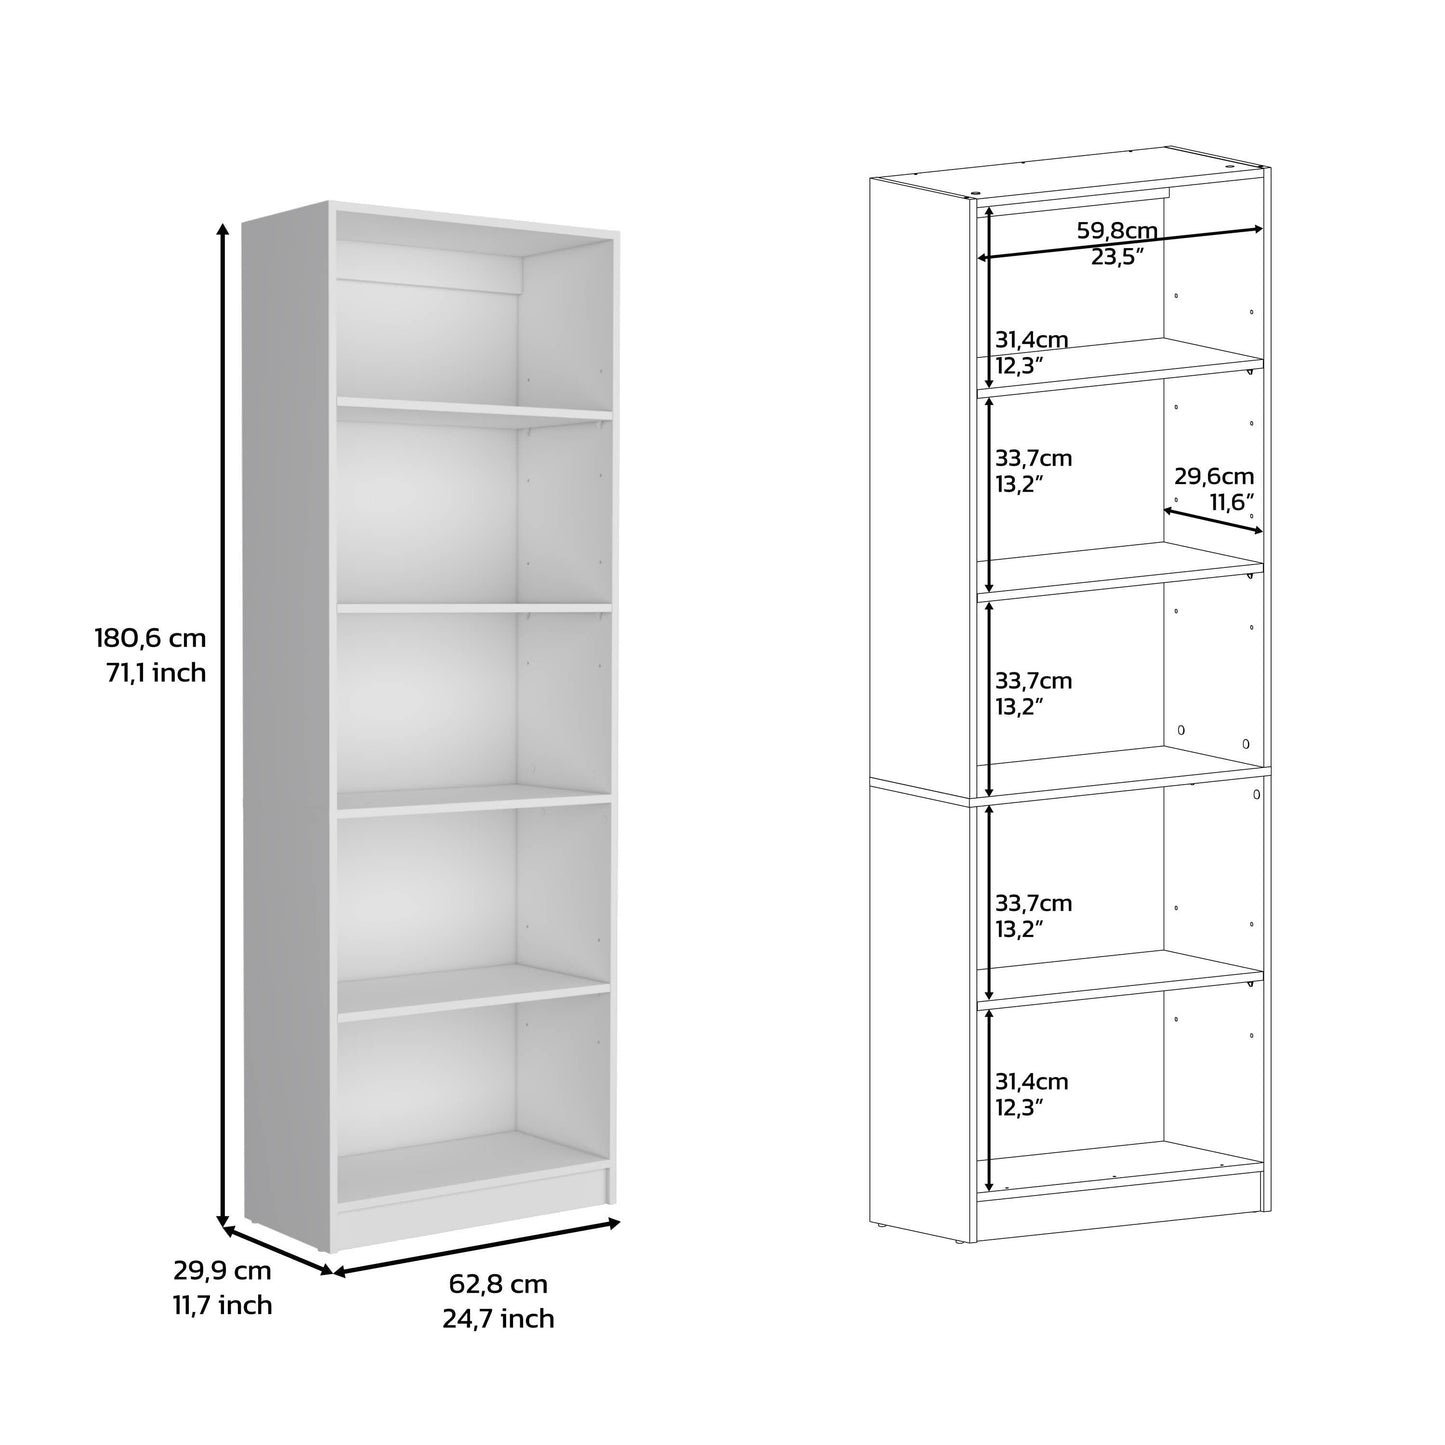 DEPOT E-SHOP Vinton 4-Tier Bookcase with Modern Storage for Books and Decor, White